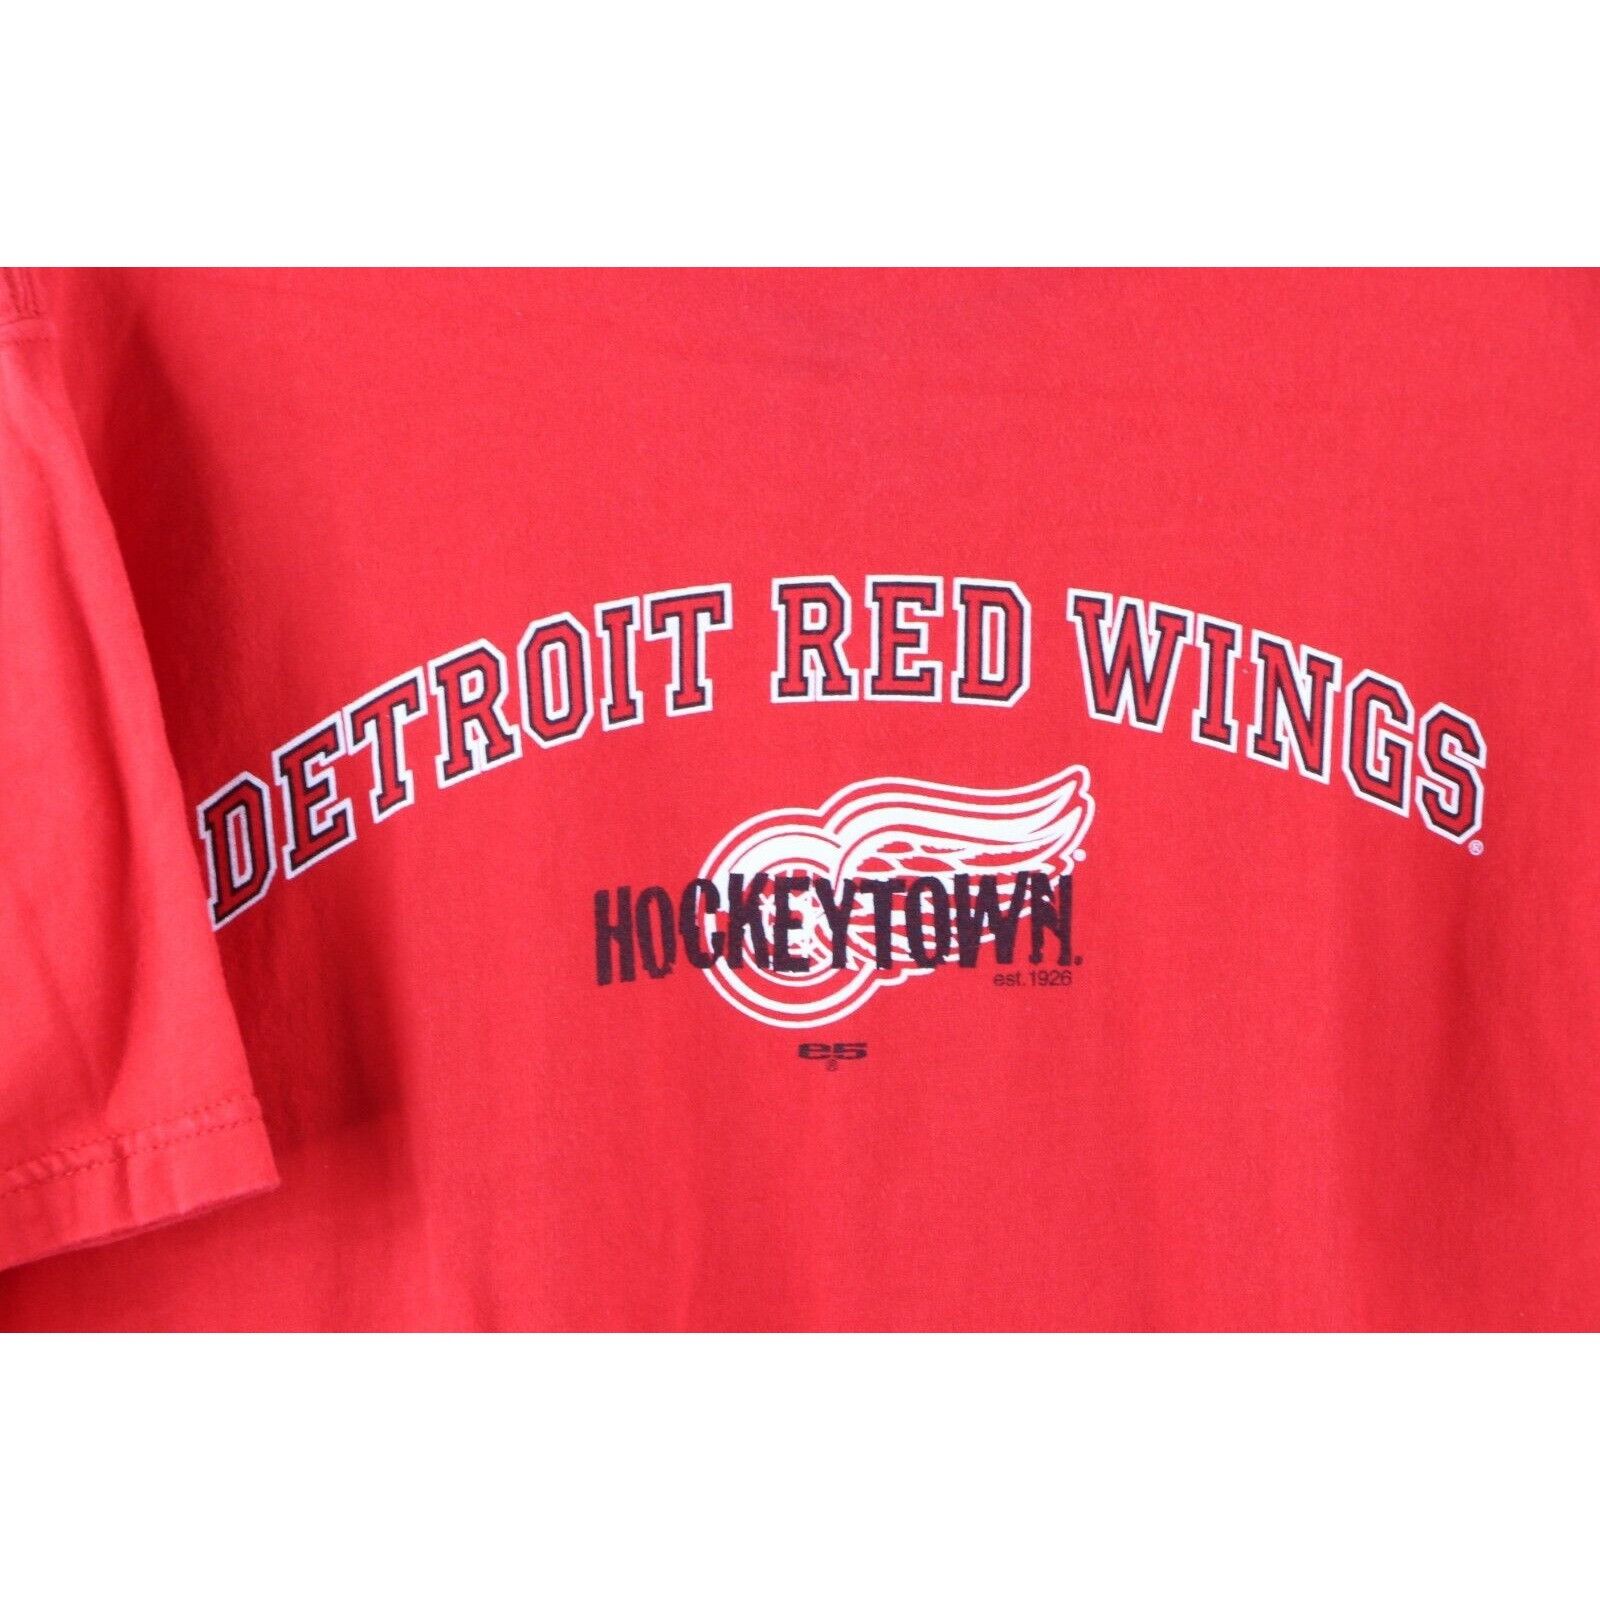 Vintage Vintage 90s Detroit Red Wings Hockey Spell Out T-Shirt Size US L / EU 52-54 / 3 - 4 Thumbnail